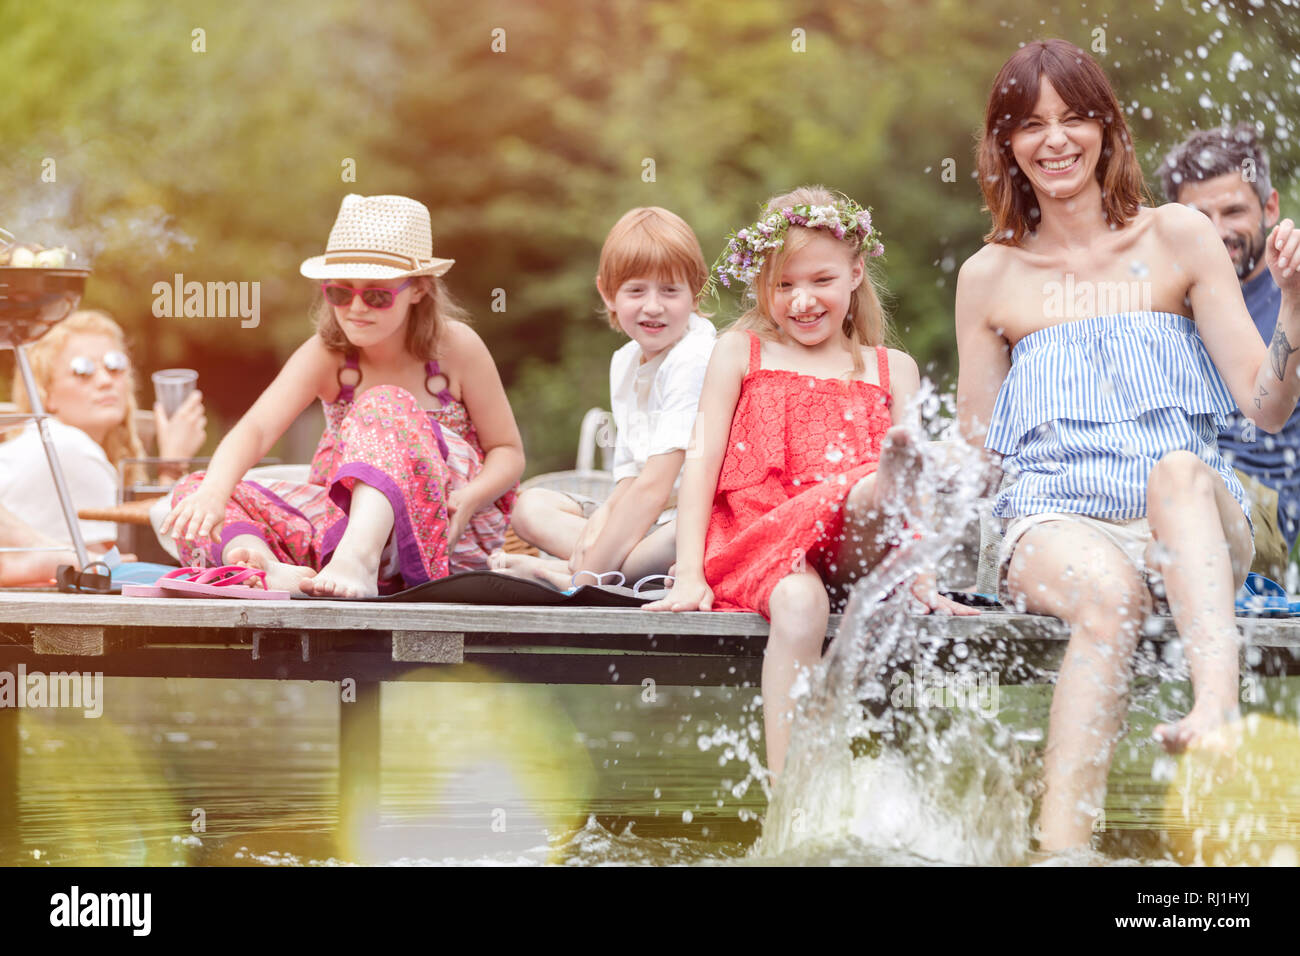 Smiling woman and daughter splashing water in lake while sitting on pier with family during summer picnic Stock Photo